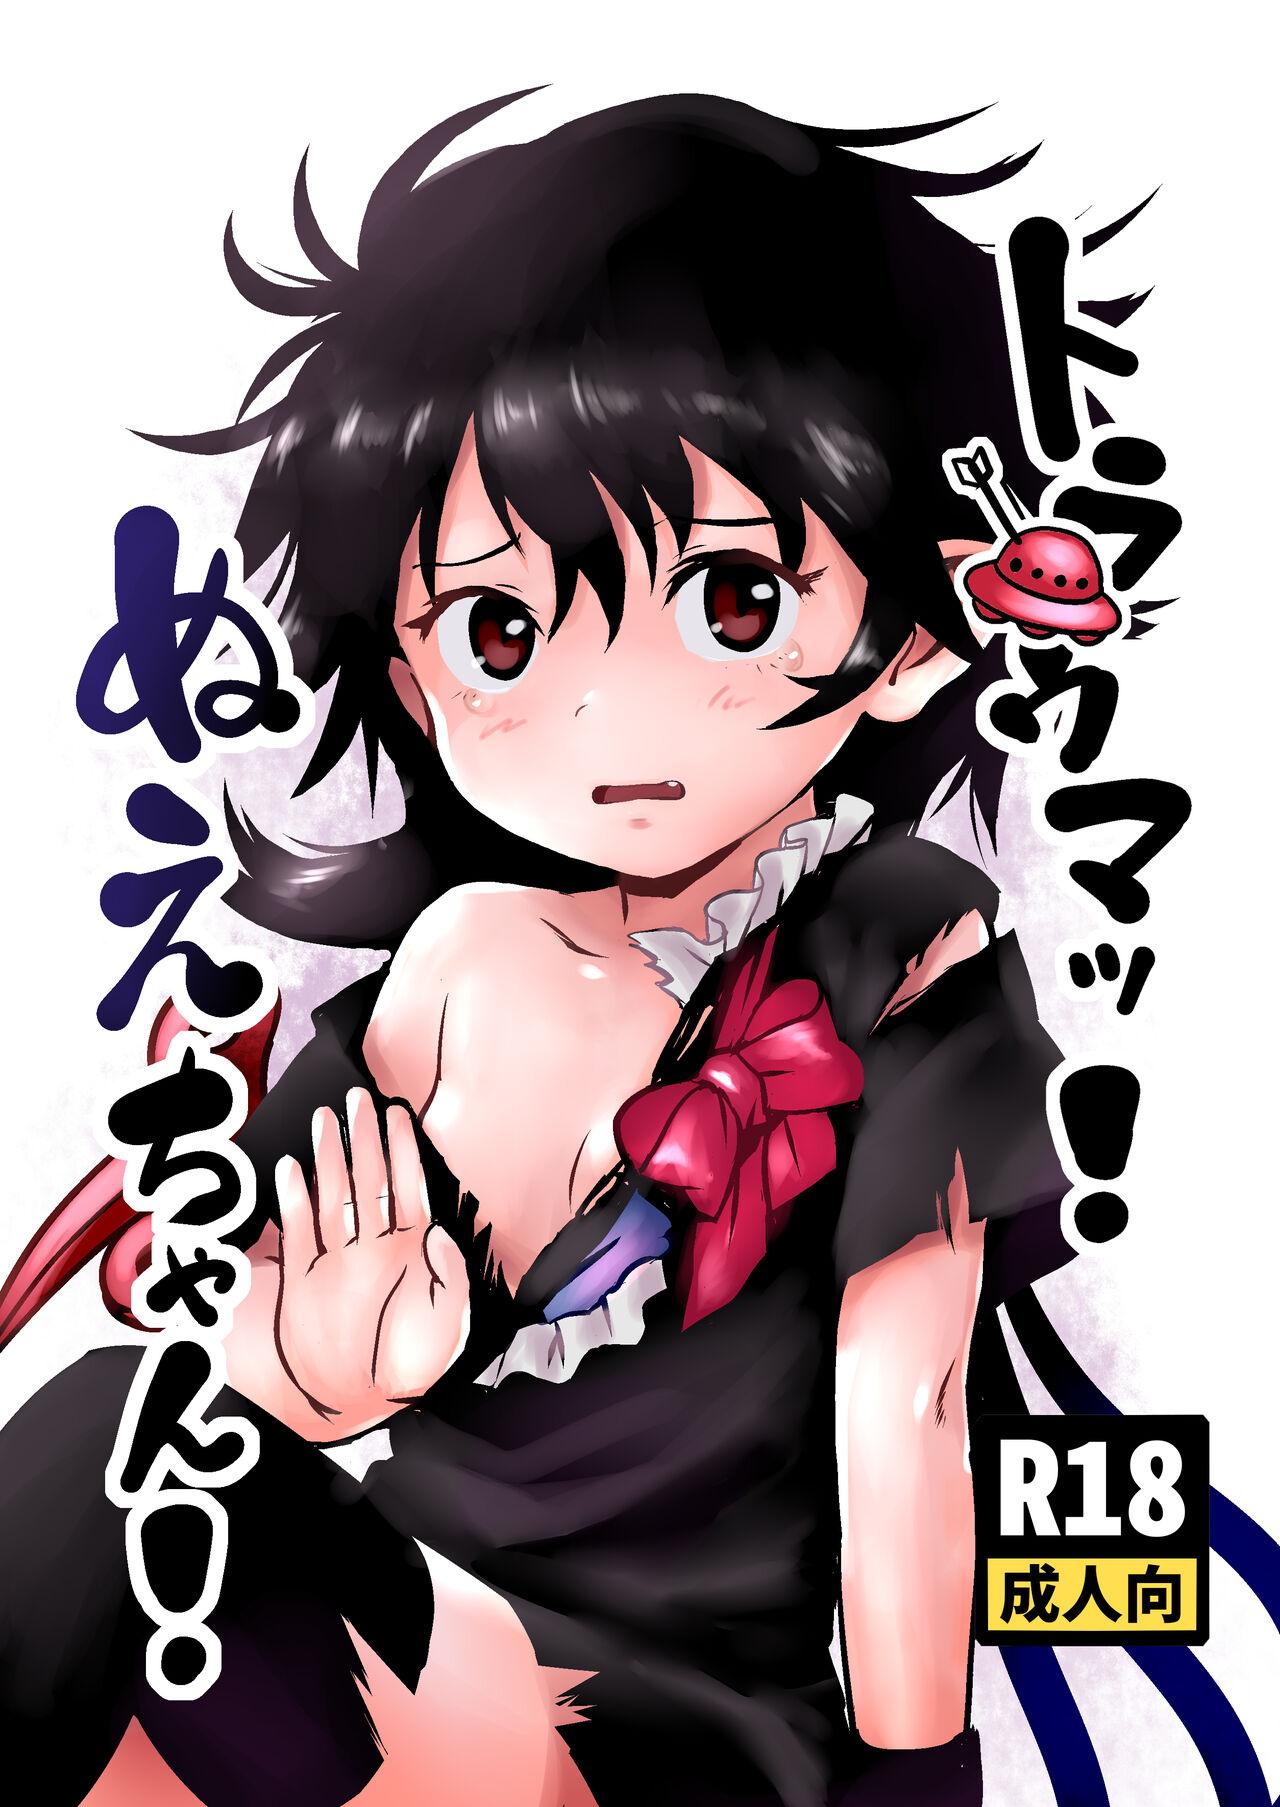 Japan Trauma! Nue-chan! - Touhou project People Having Sex - Picture 1